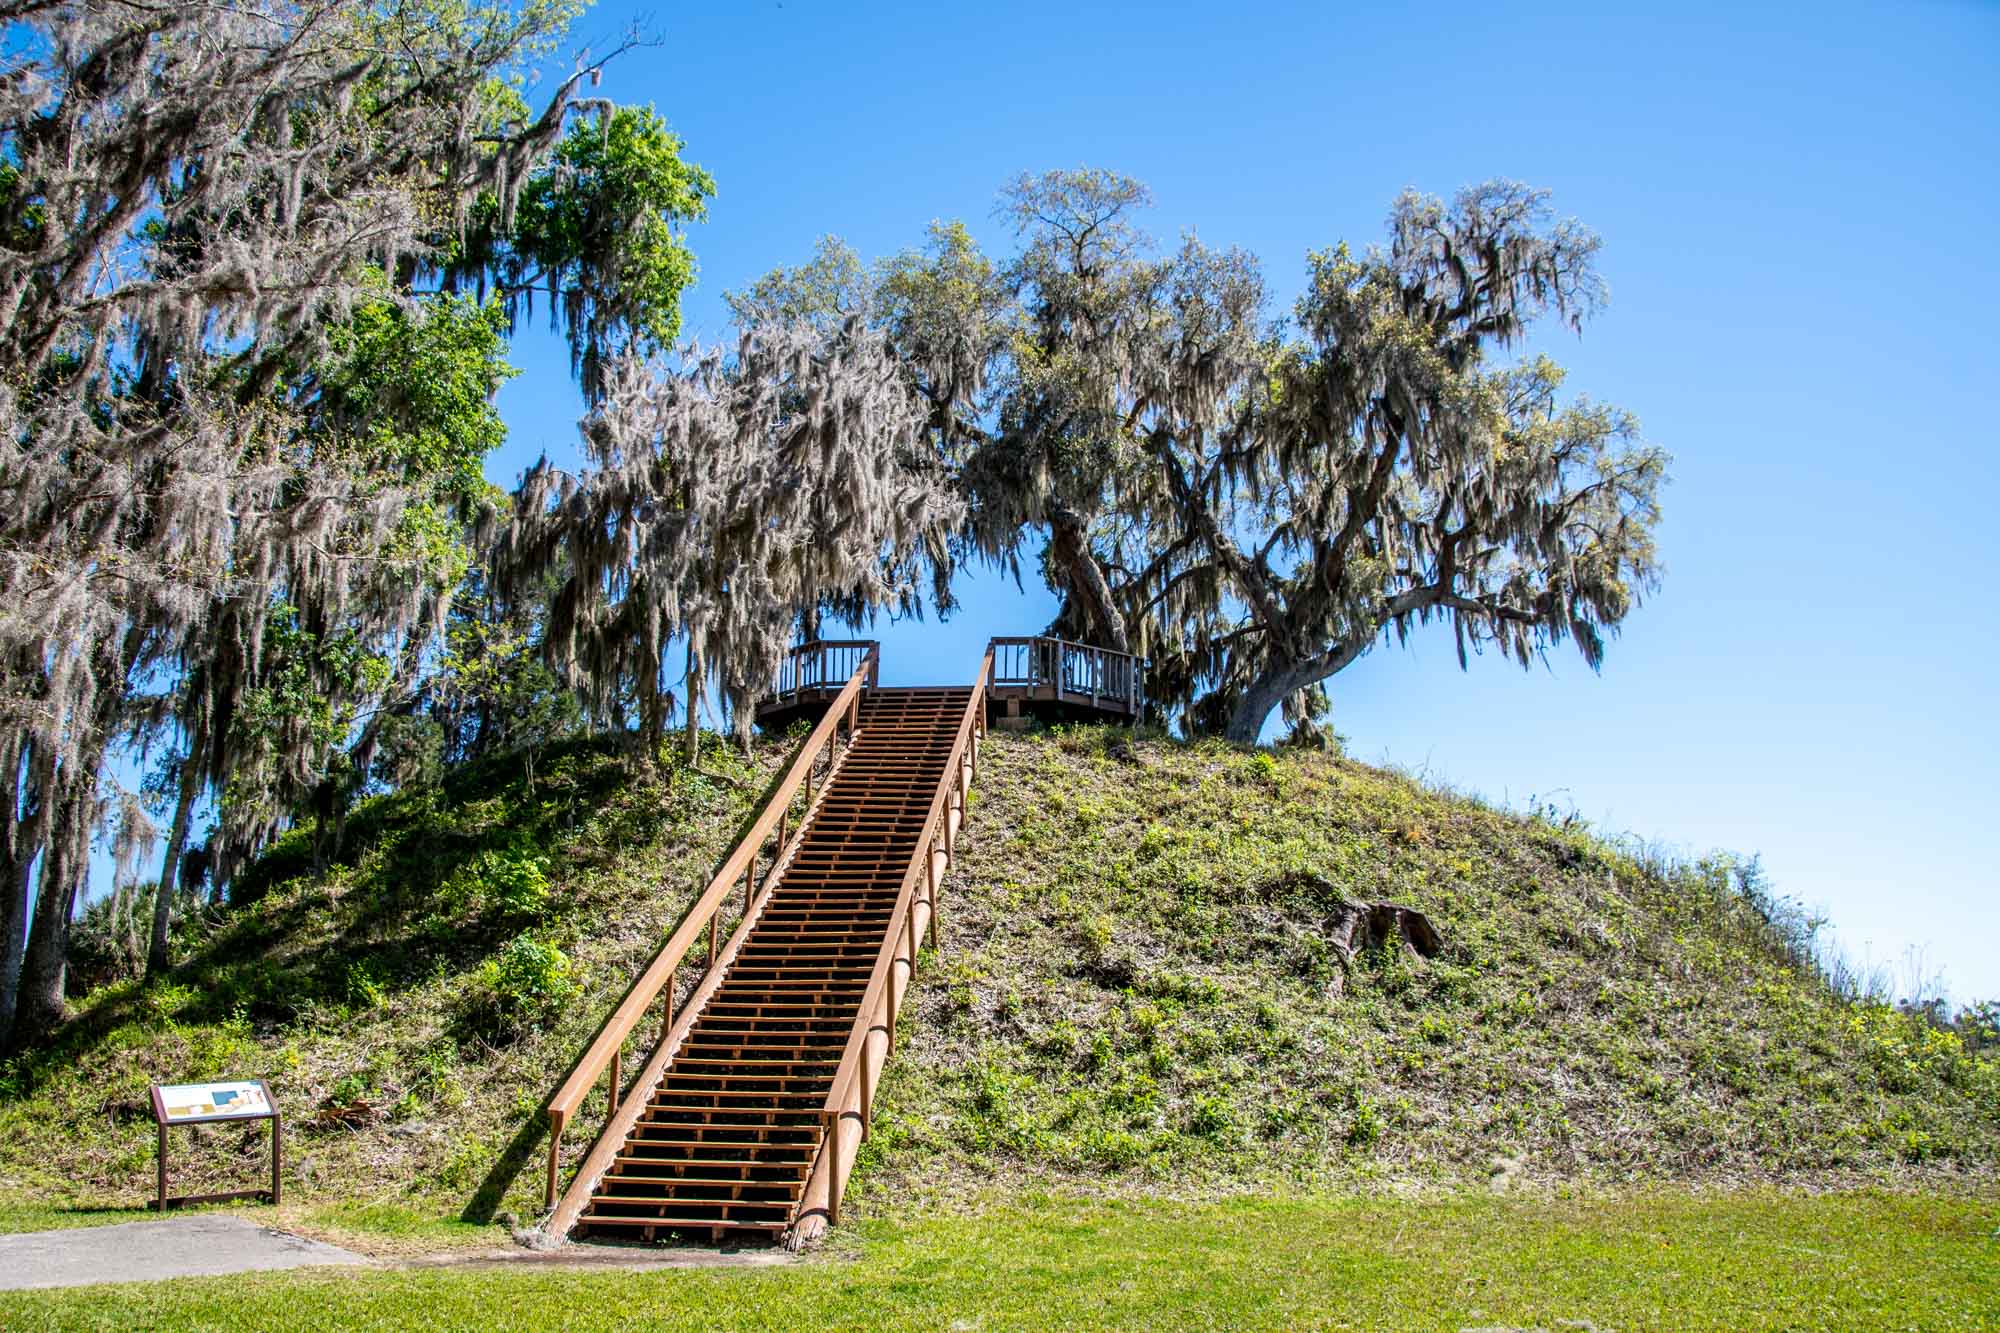 Wooden stairs leading up Native American Temple Mound in Florida